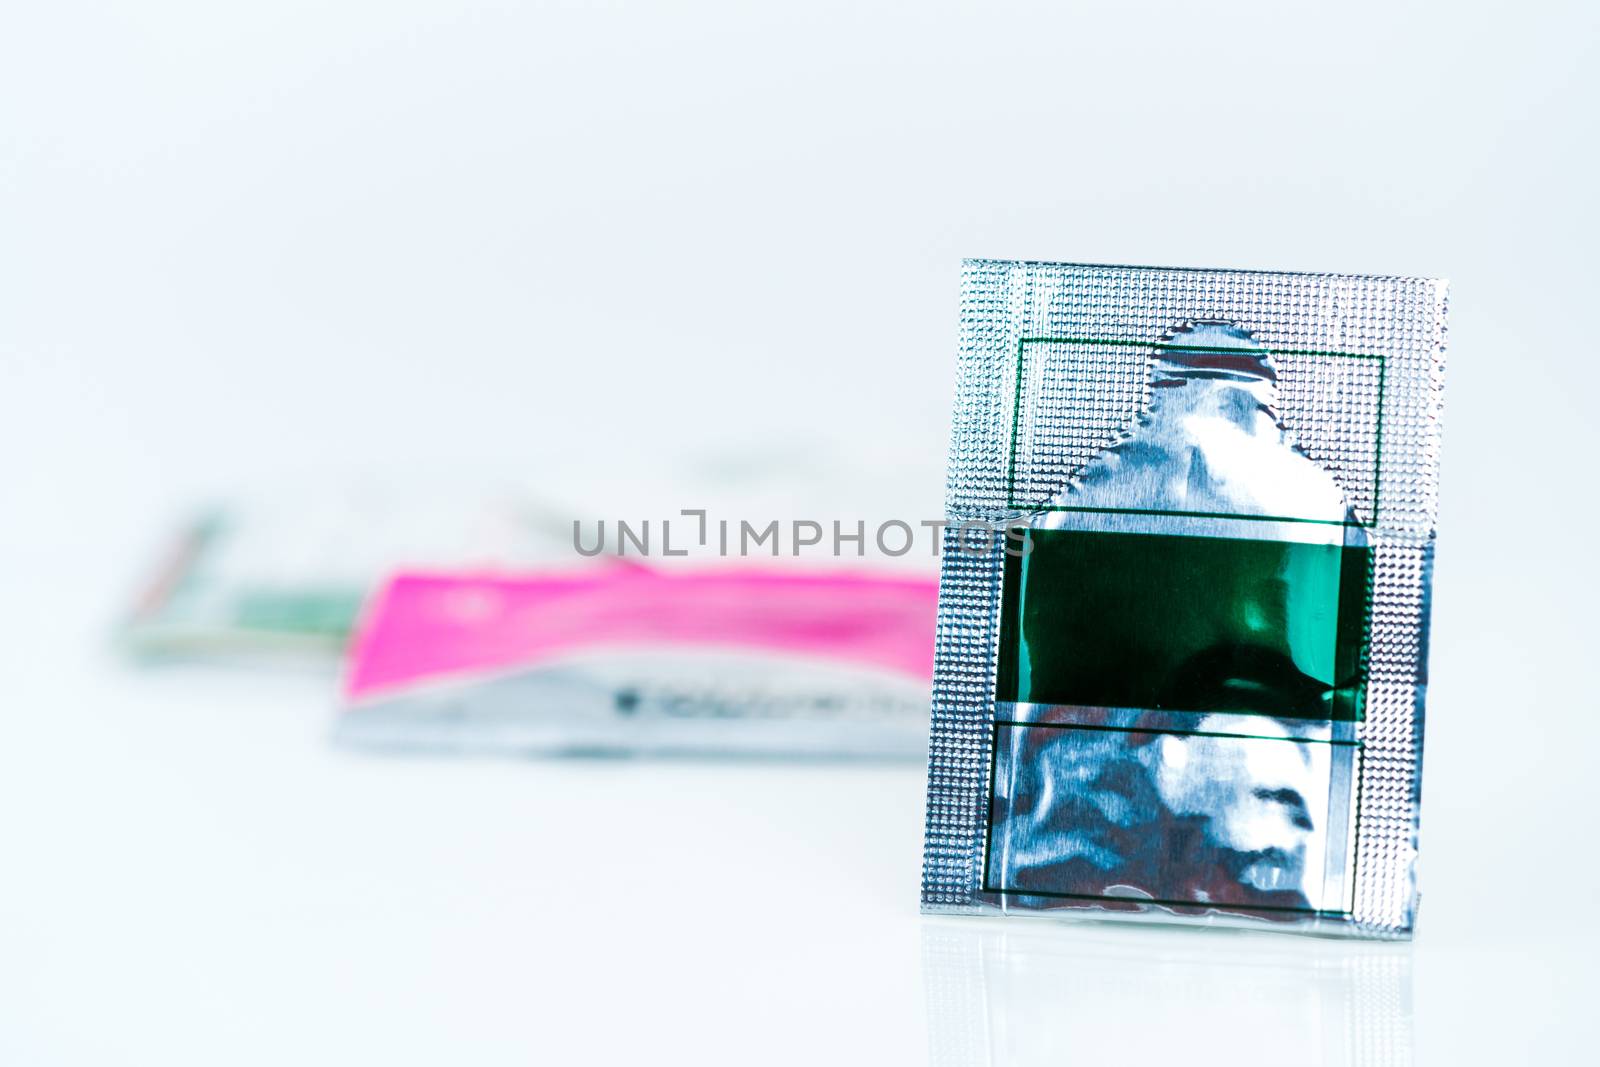 Mild steroid oral paste in aluminium foil sachet on blur background of sachets. Anti-inflammatory for oral mucous membrane, relief oral tenderness, pain, and ulceration. Aphthous ulcer or mouth ulcers